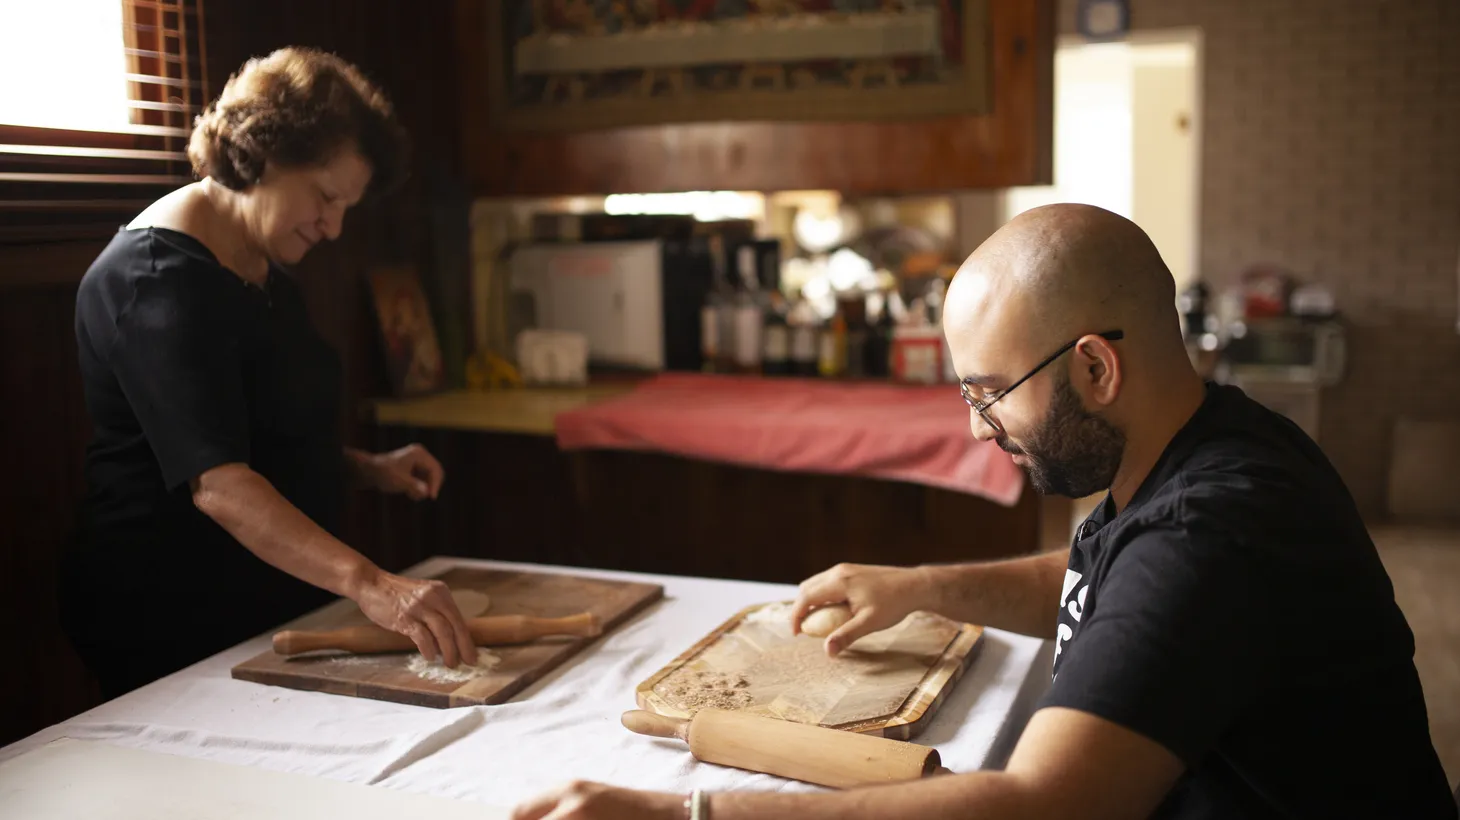 Amir Edward is the founder of The Original Hawowshi and one of the participants in the exhibition “Kneaded.” When he could not source Egyptian aish baladi bread in LA, he went to his grandmother, Salwa Ibrahim, to learn how to make his own.